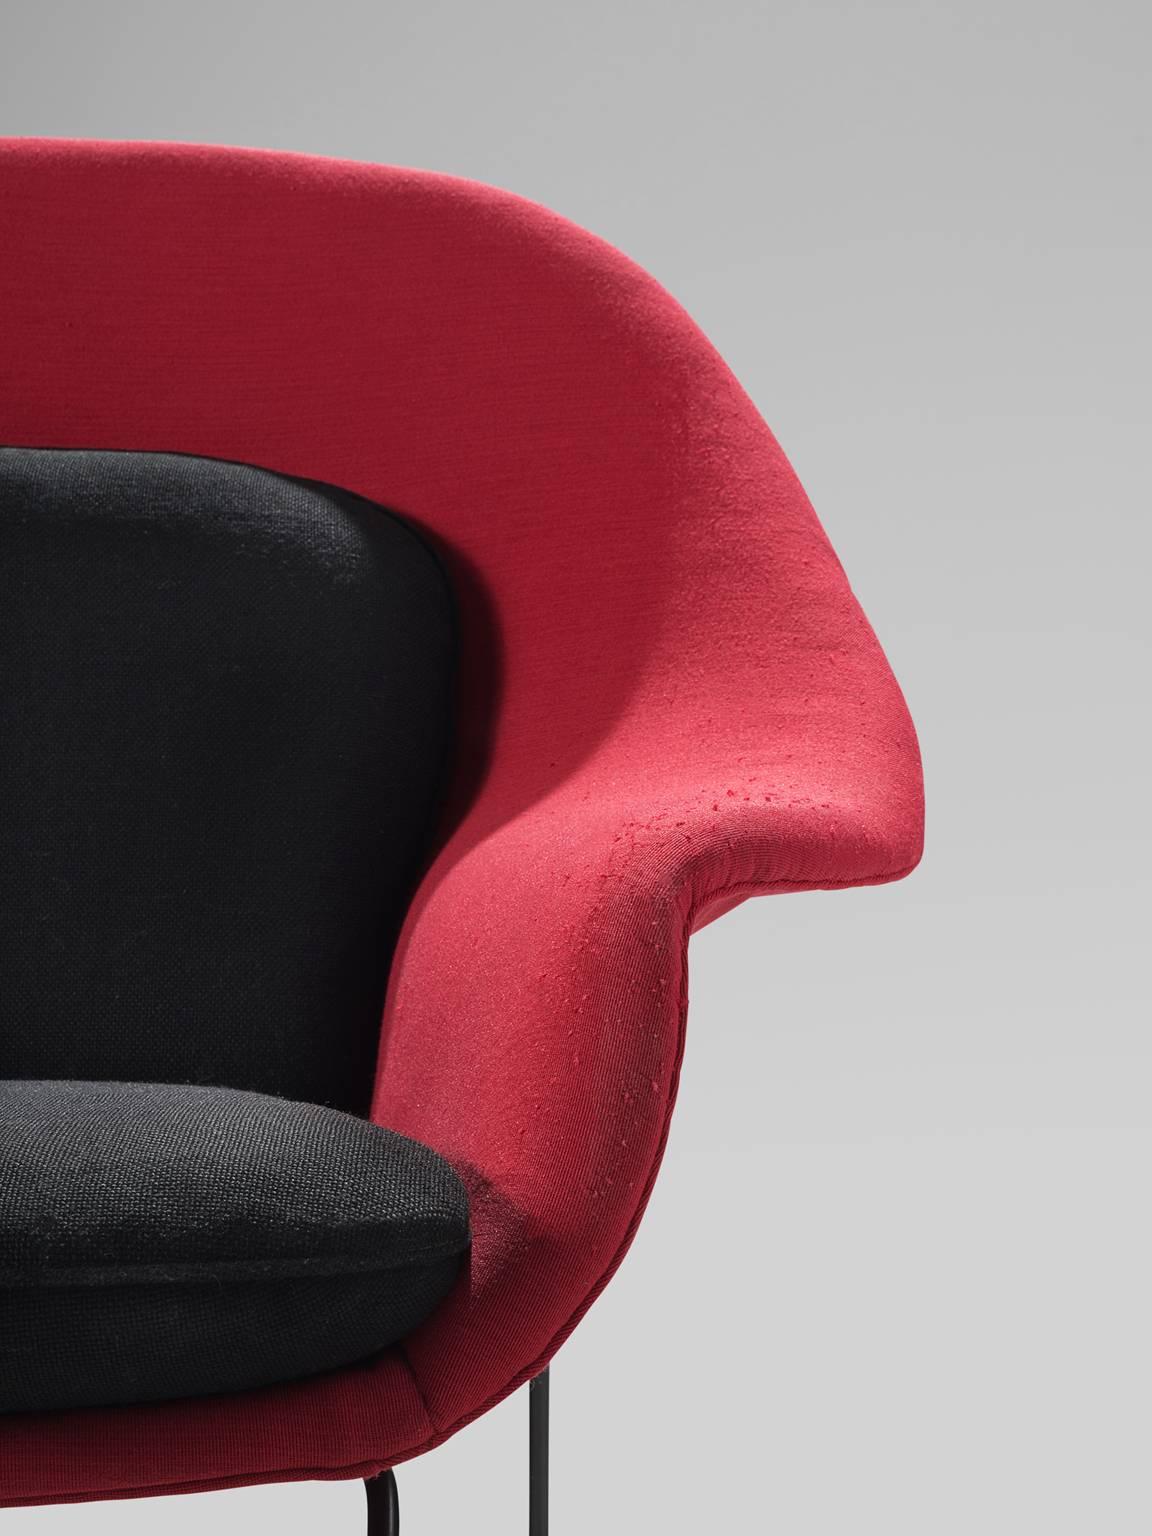 Pair of Womb Chairs by Eero Saarinen for Knoll 1